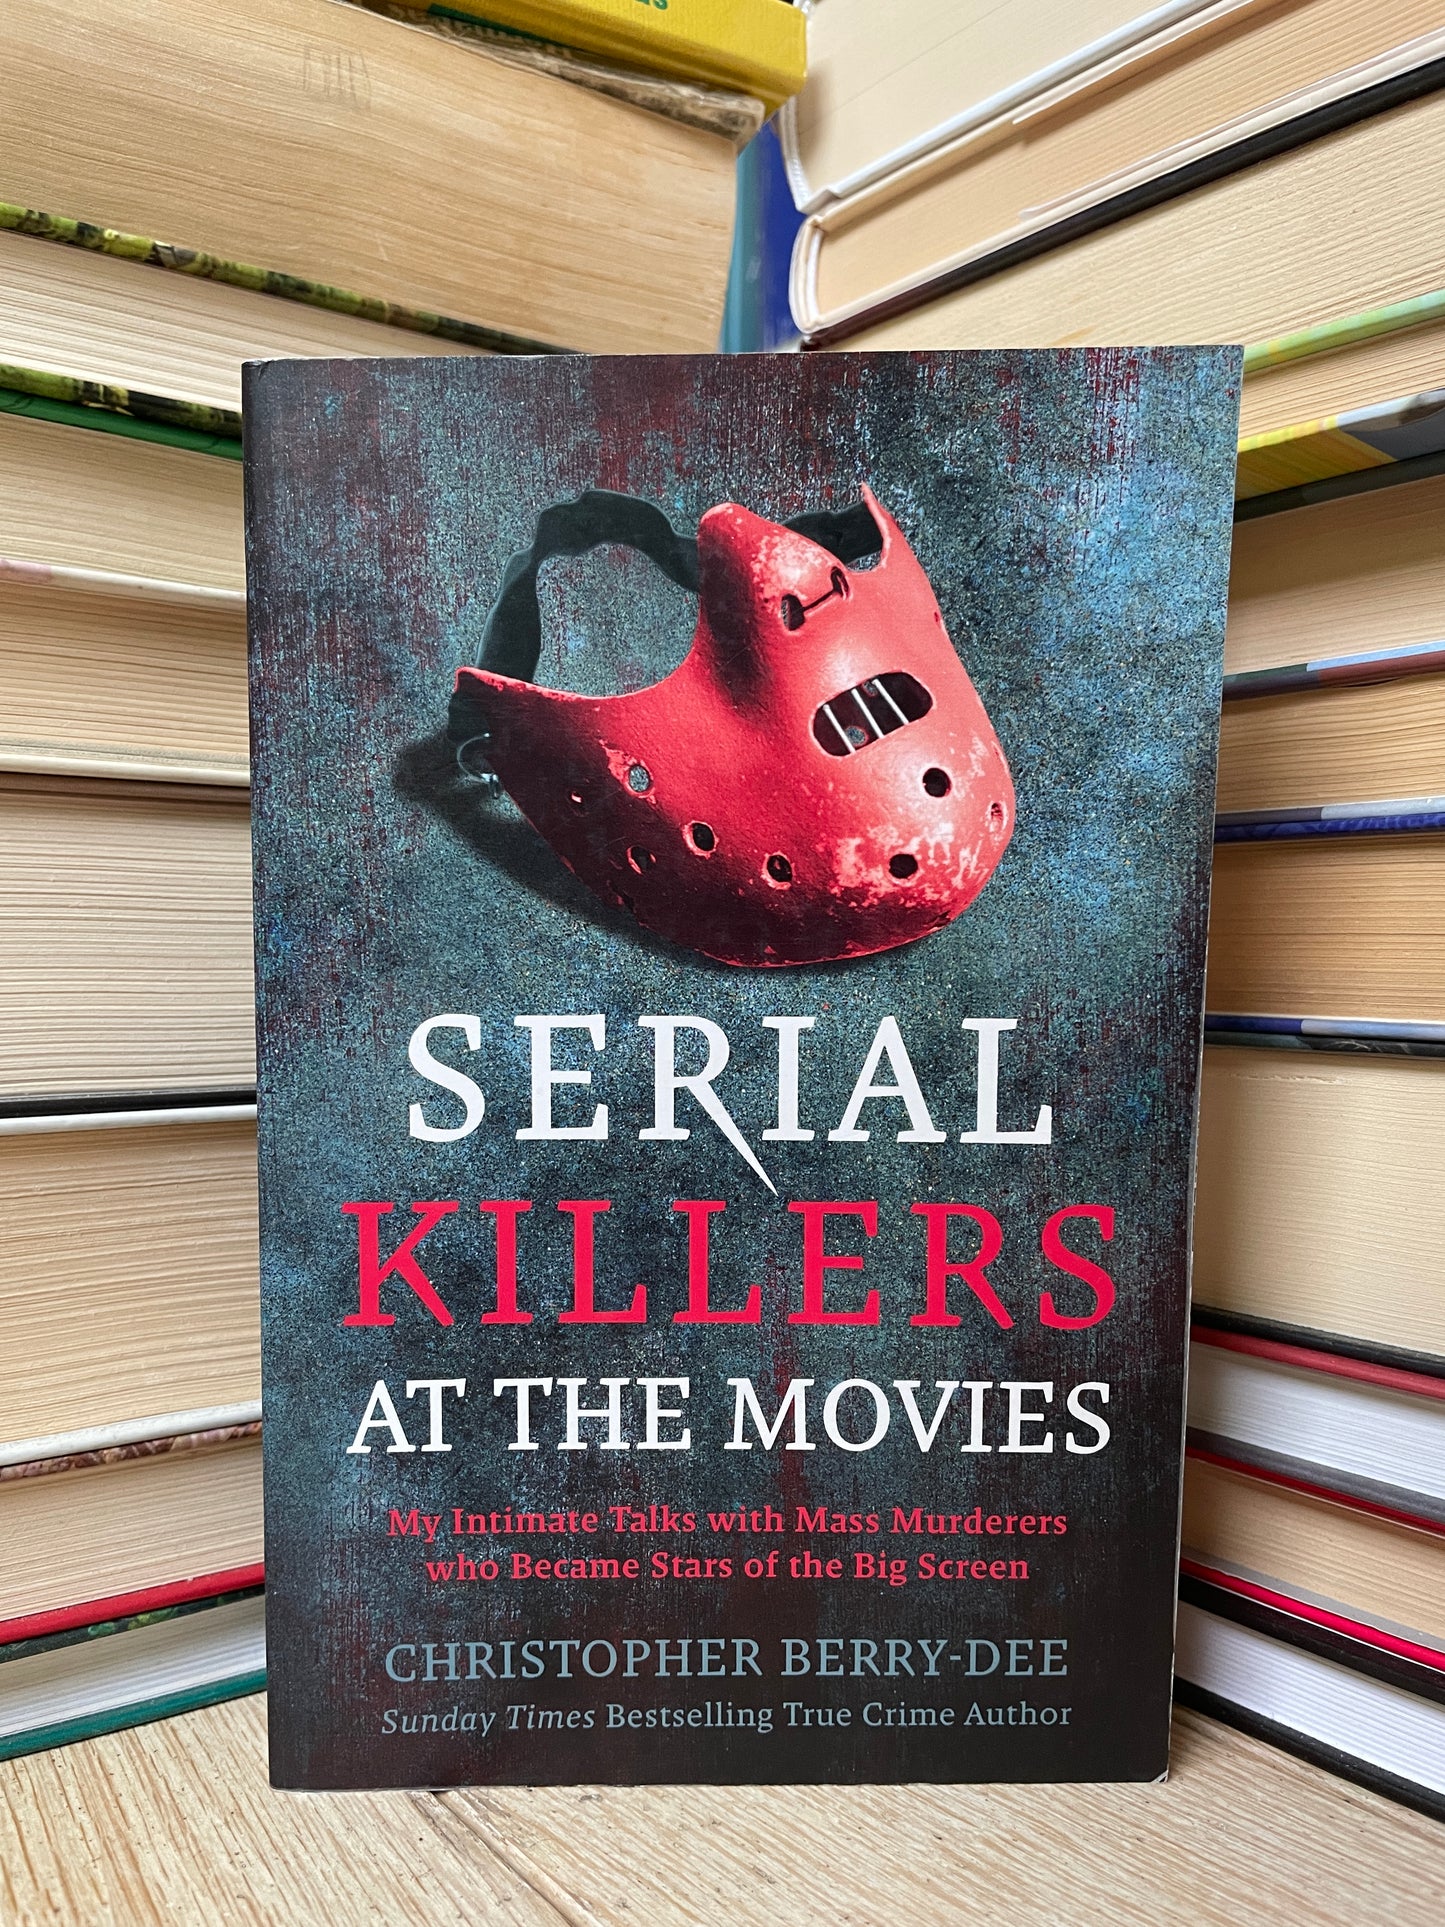 Christopher Berry-Dee - Serial Killers at the Movies